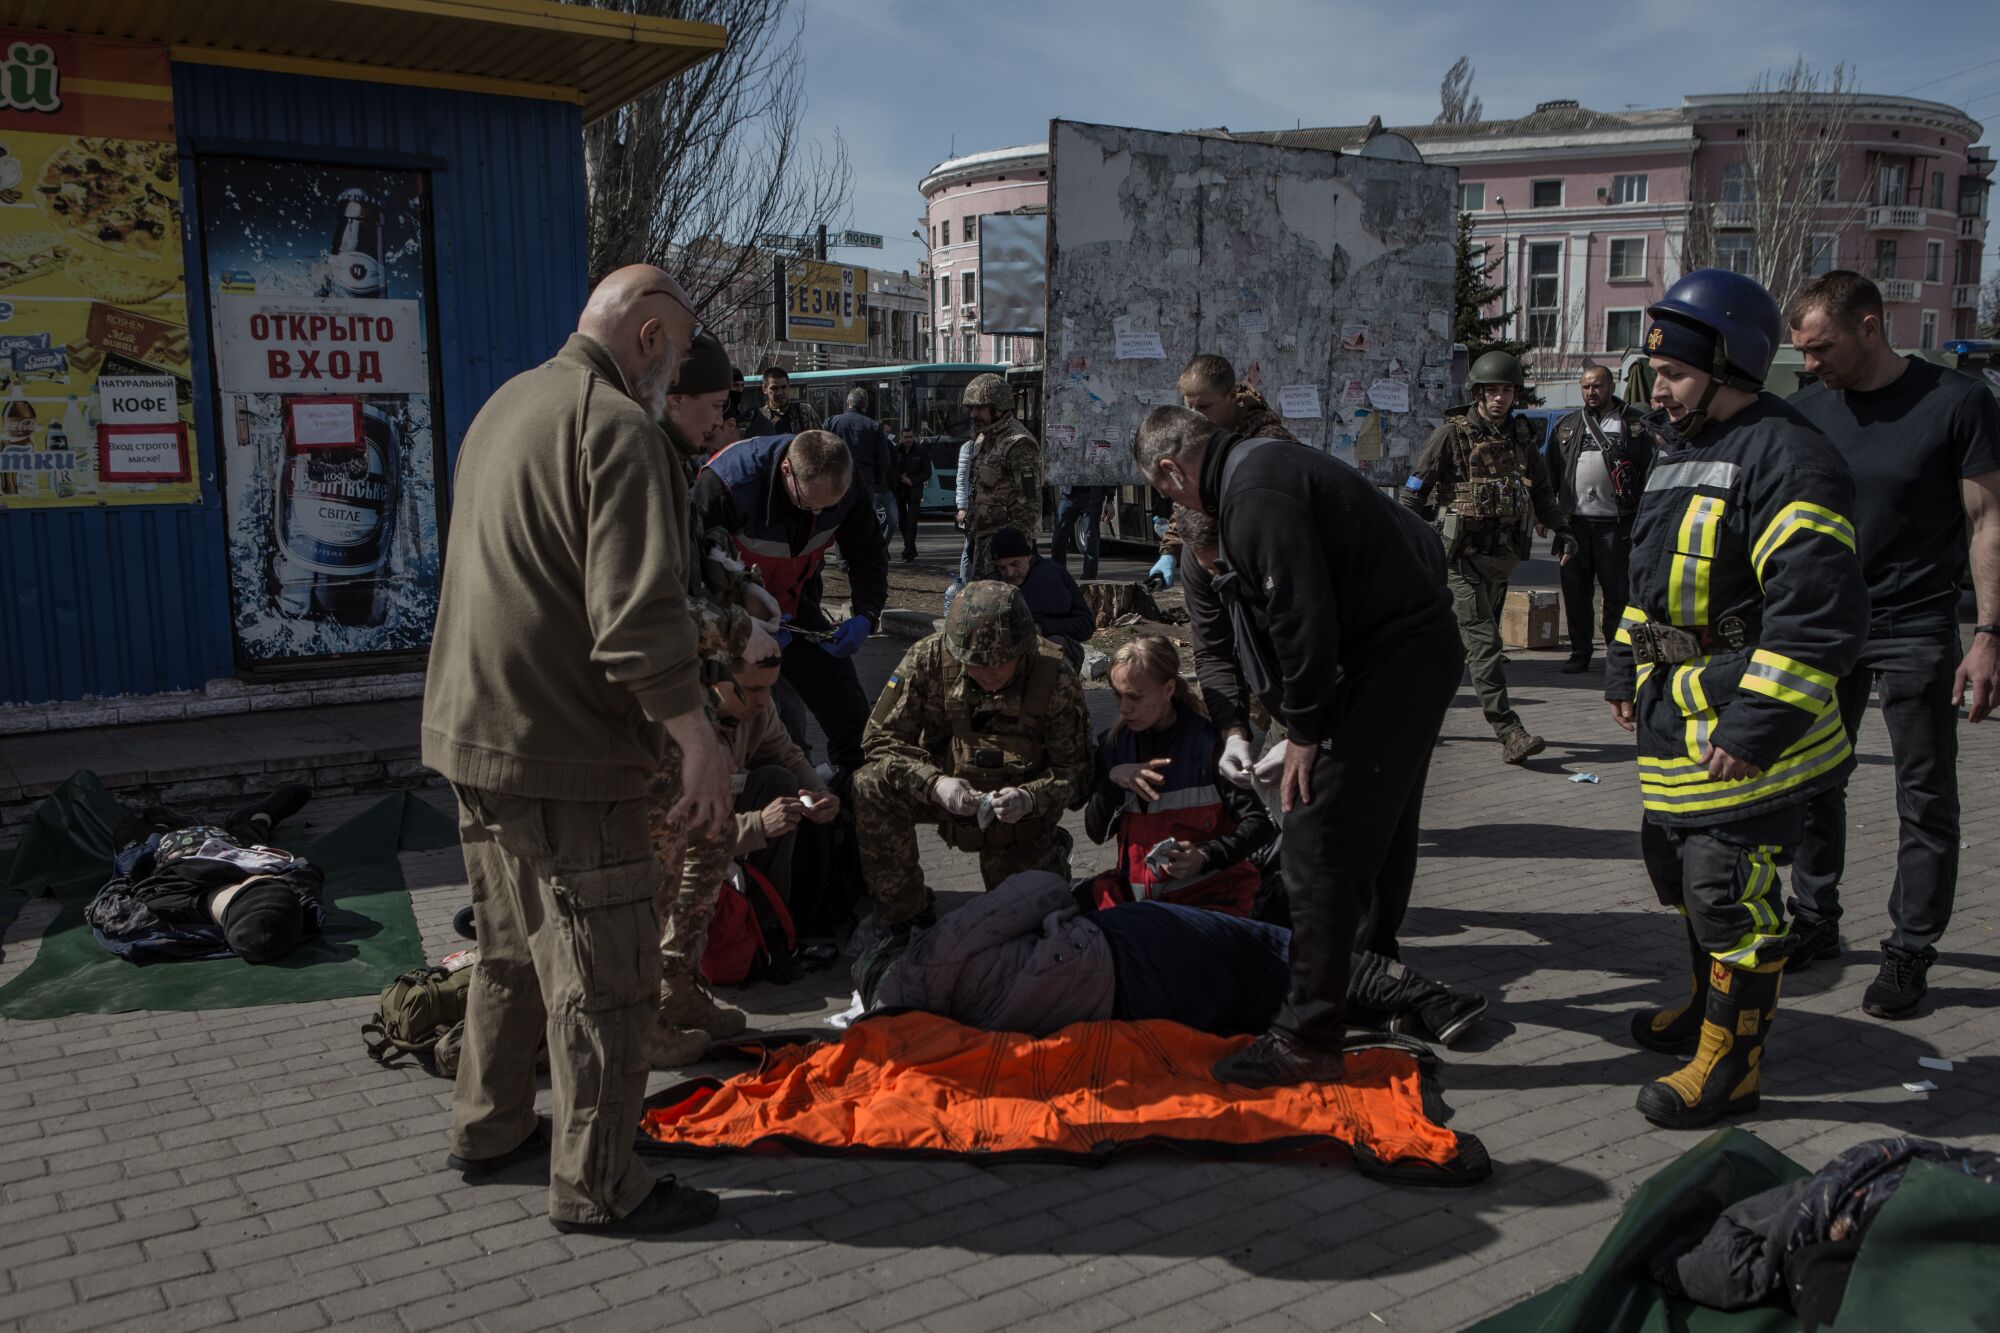 People gather around a person on the ground after Friday's rocket attack on a train station in eastern Ukraine.